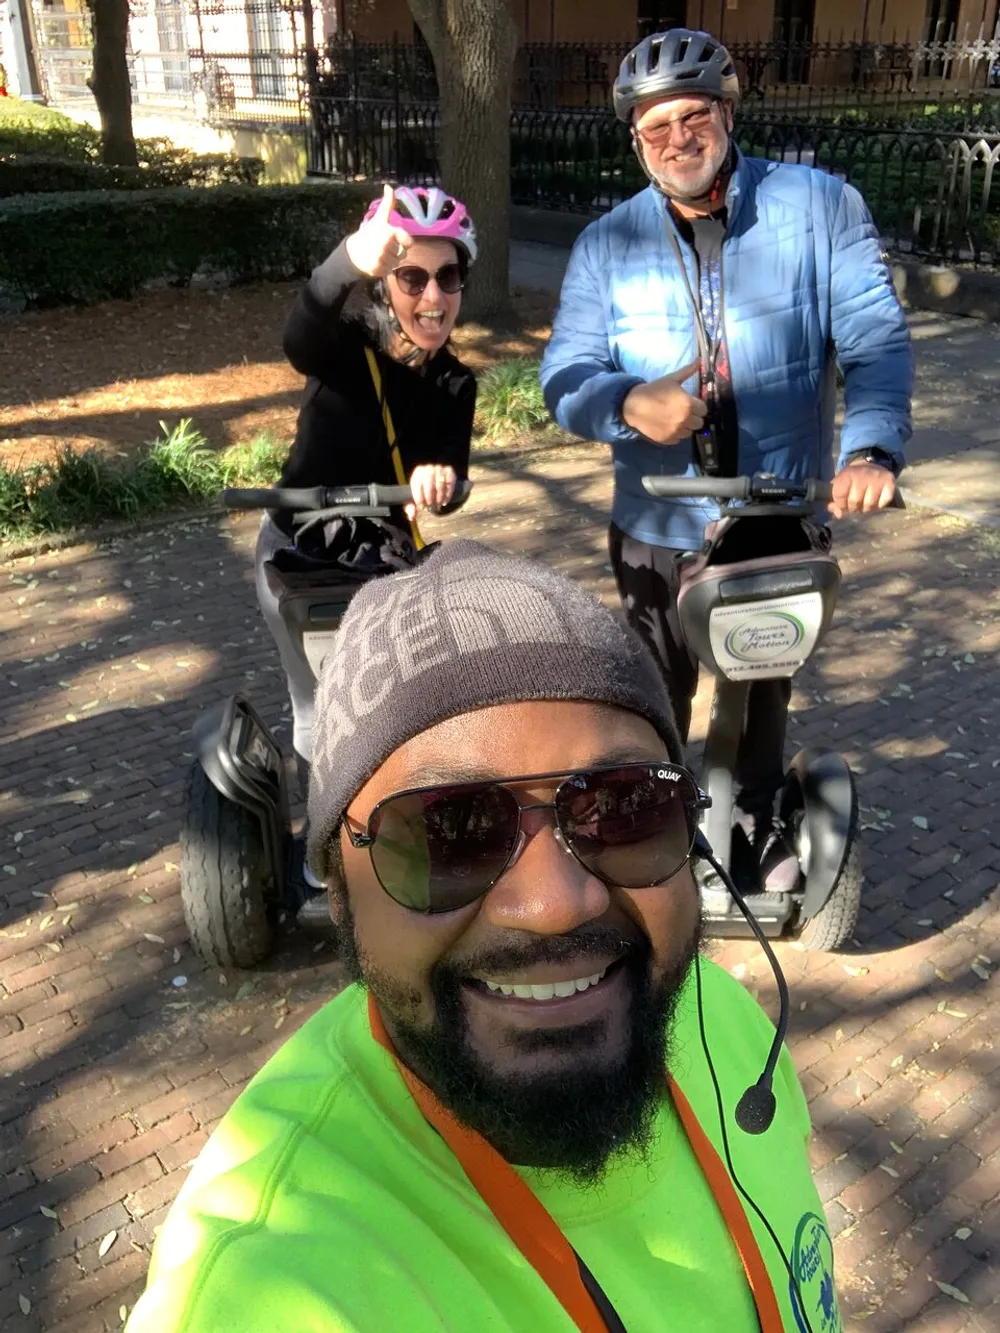 Three people are posing for a selfie with two of them on segways all wearing helmets and smiling in an outdoor setting